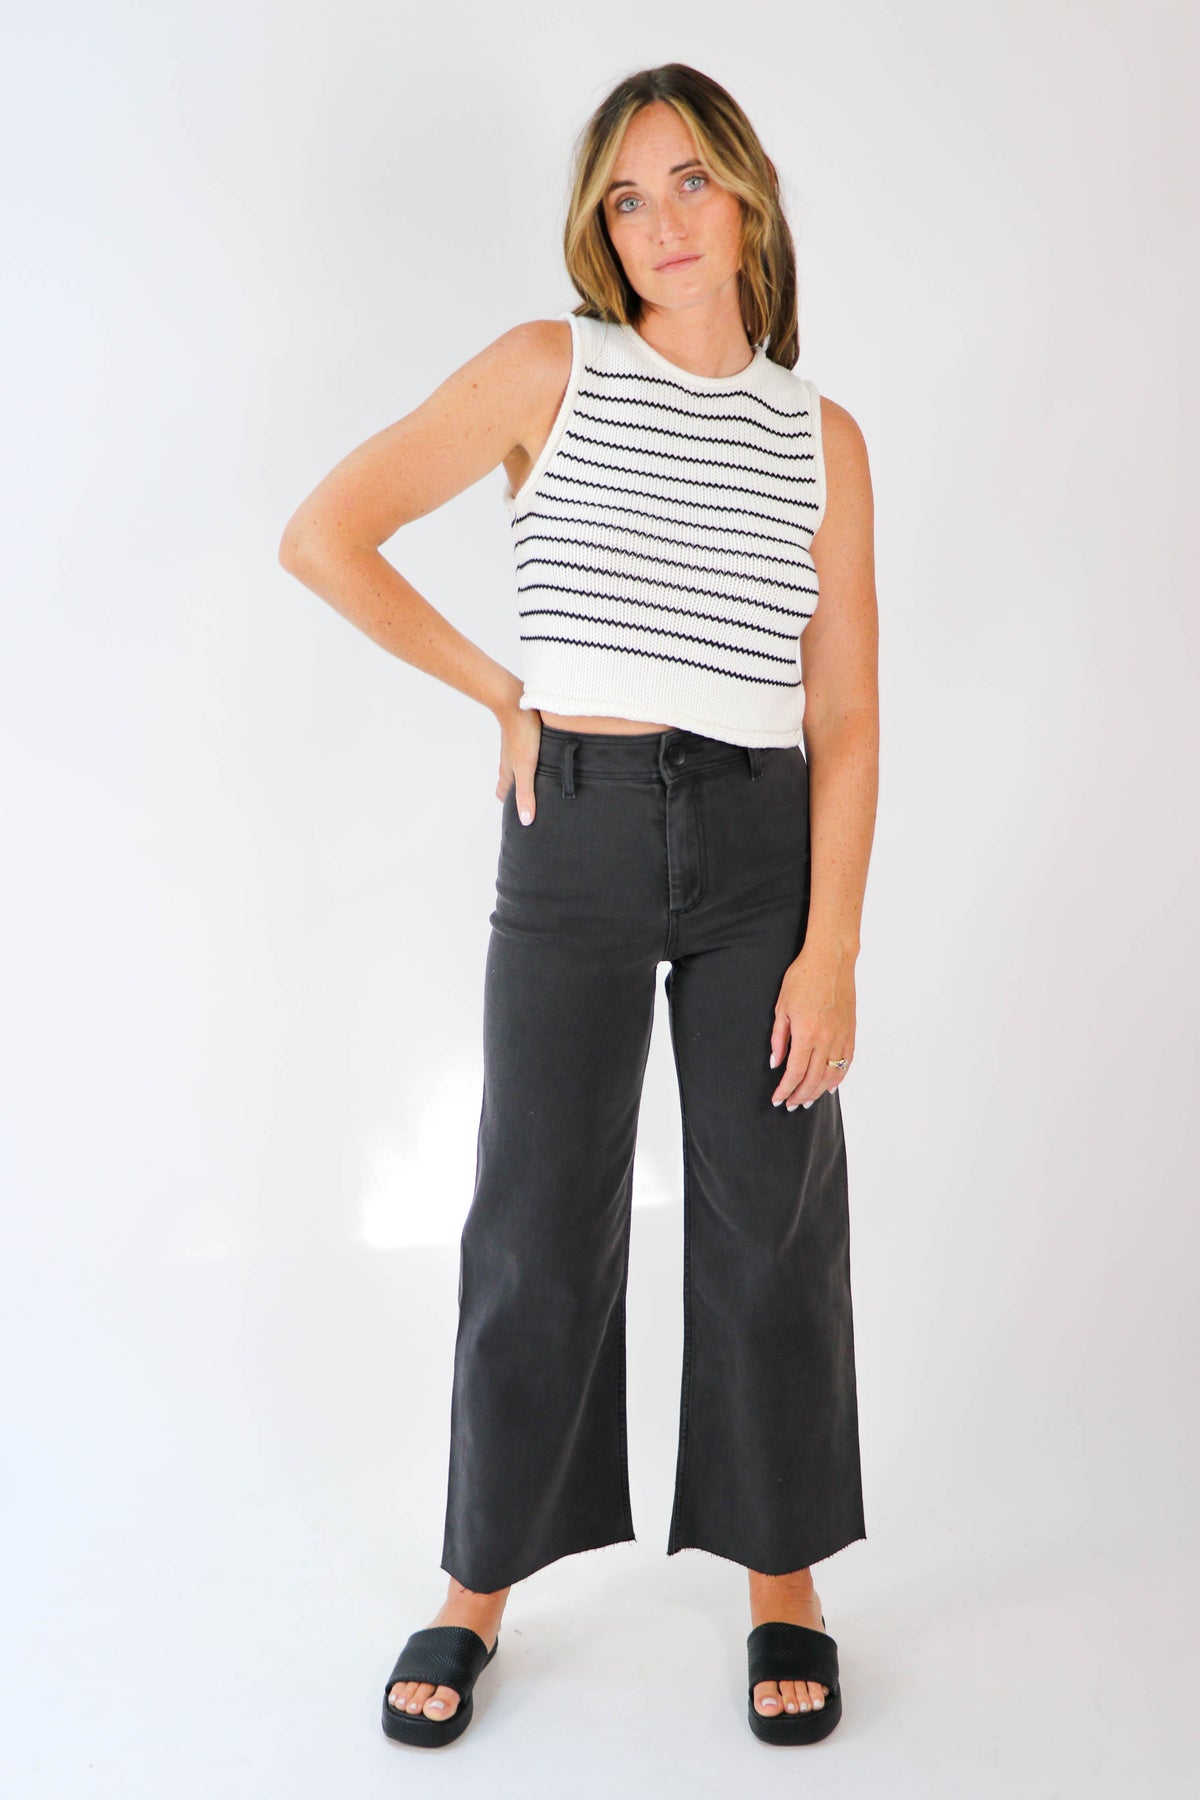 Miou Muse | White and Black Stripe Knit Top | Sweetest Stitch Online